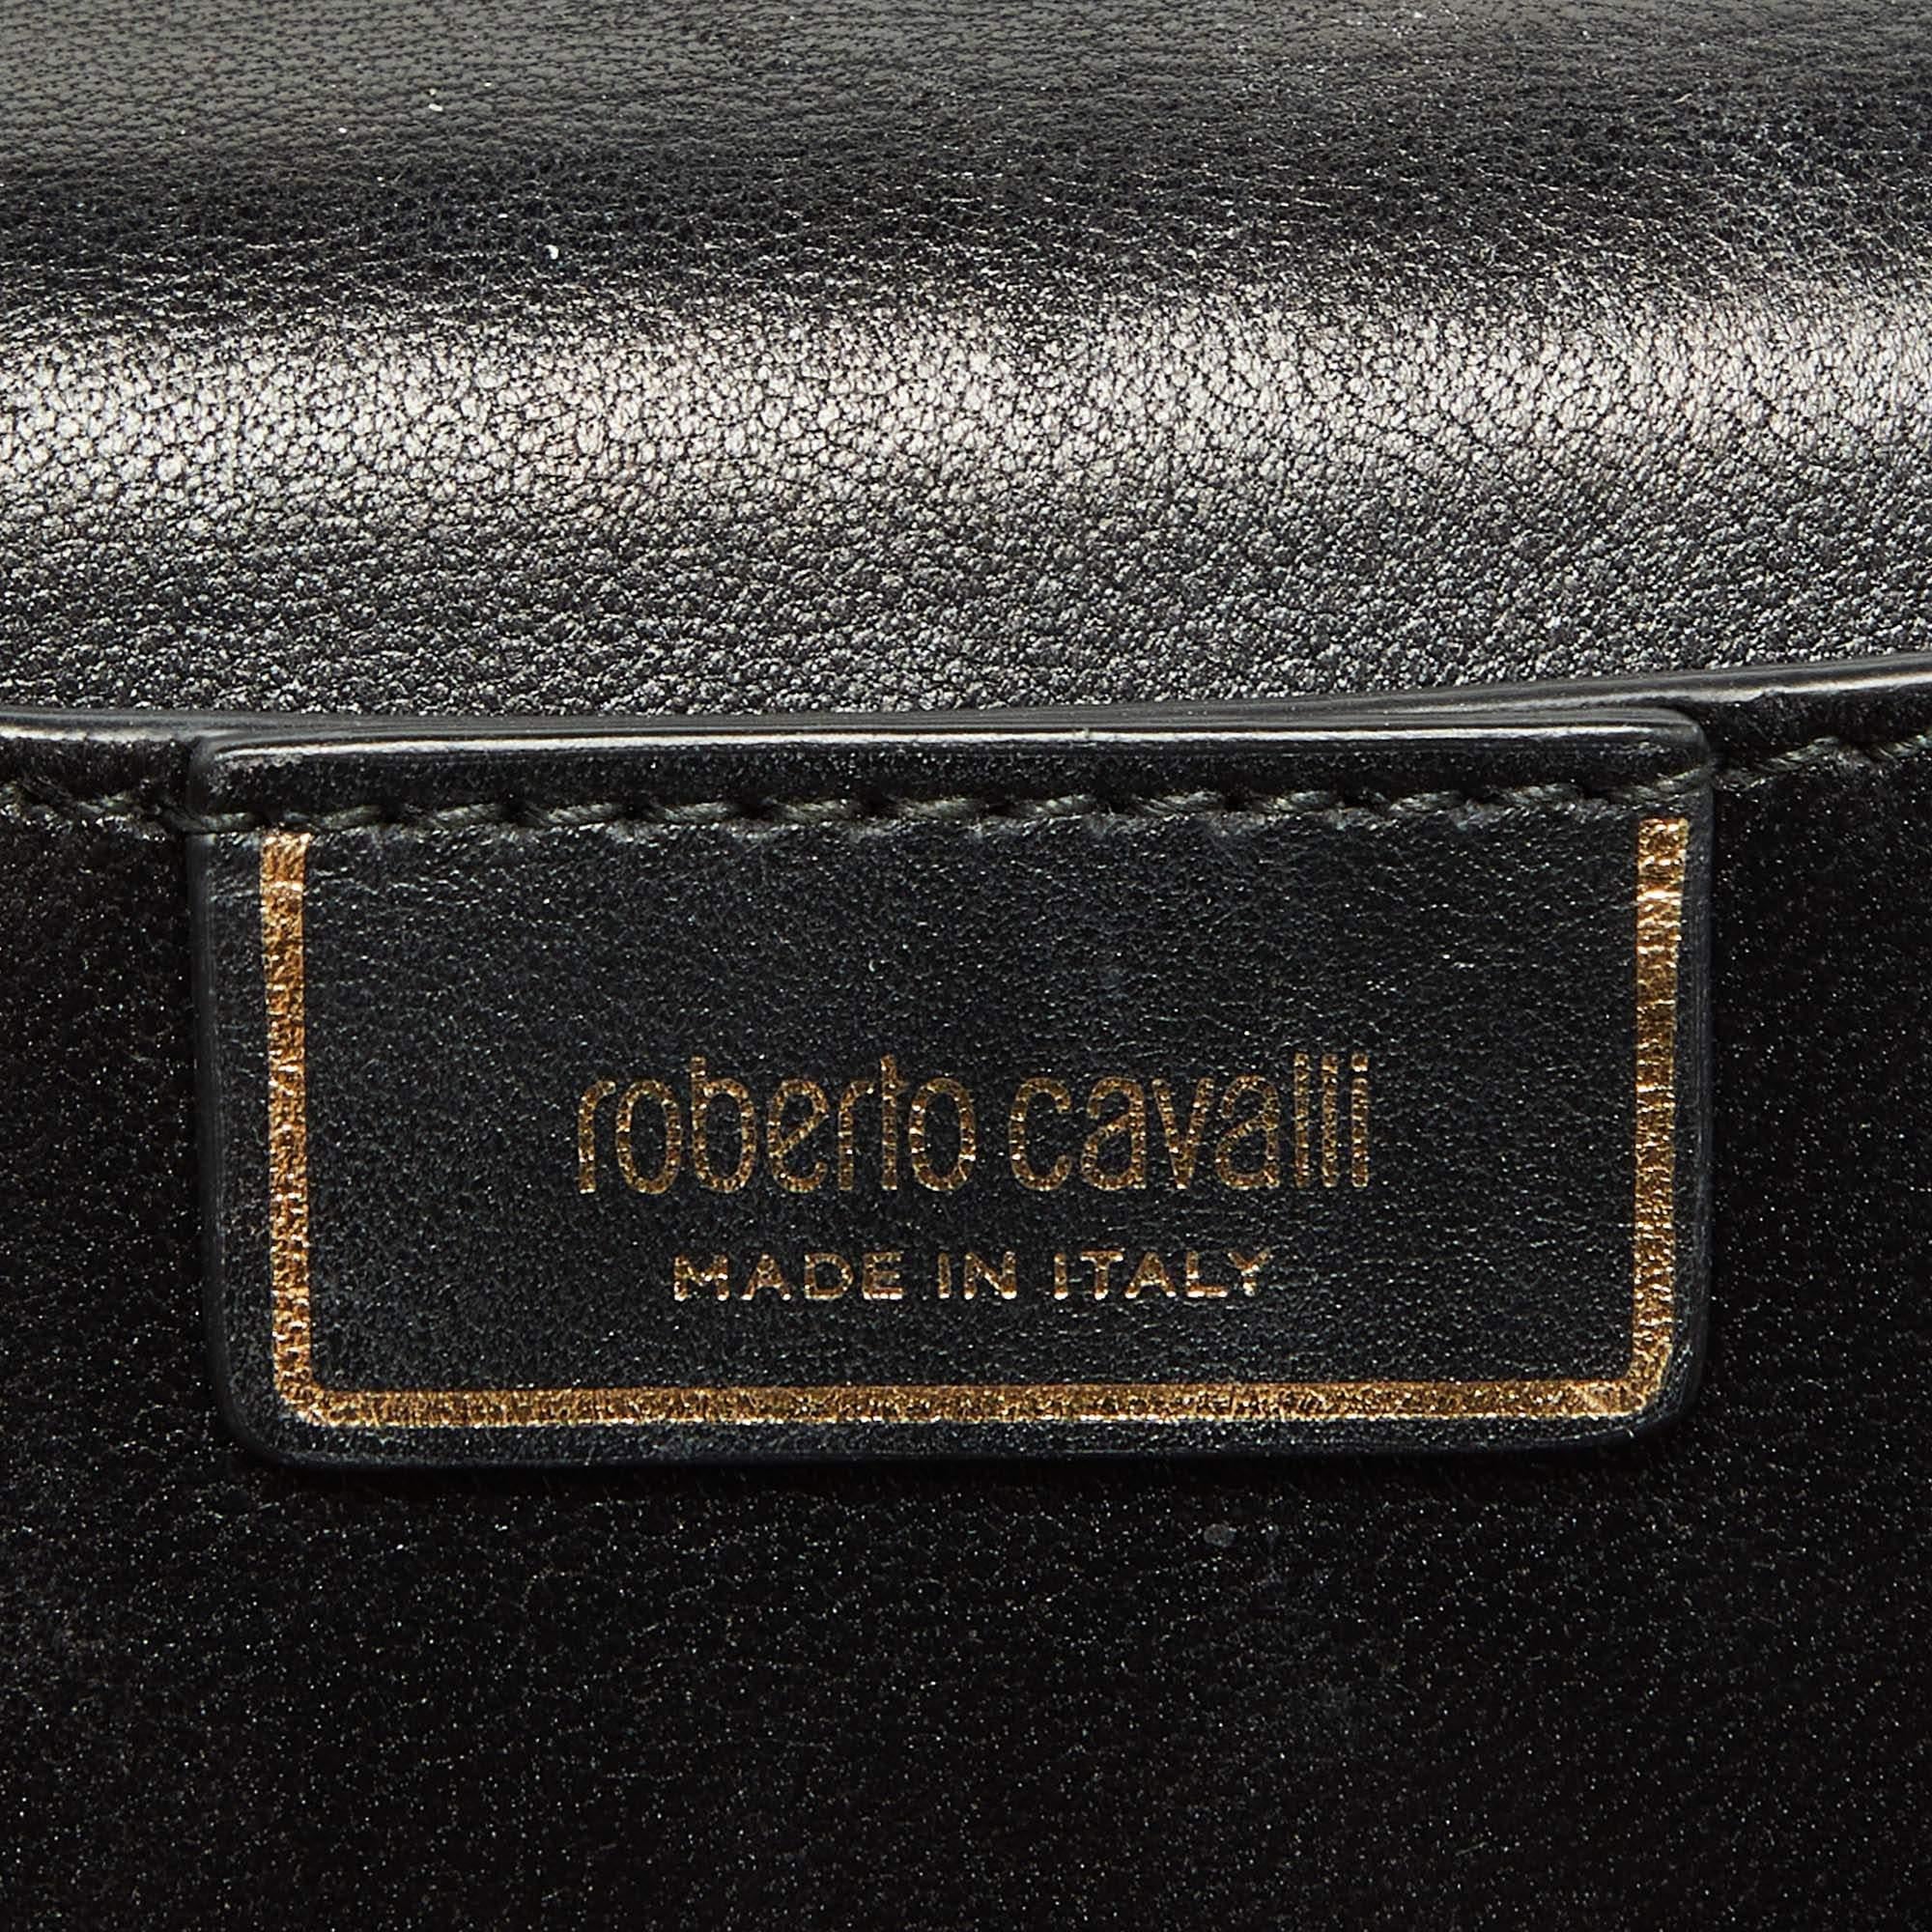 Roberto Cavalli Black Watersnake Leather Serpente Frame Chain Bag For Sale 3